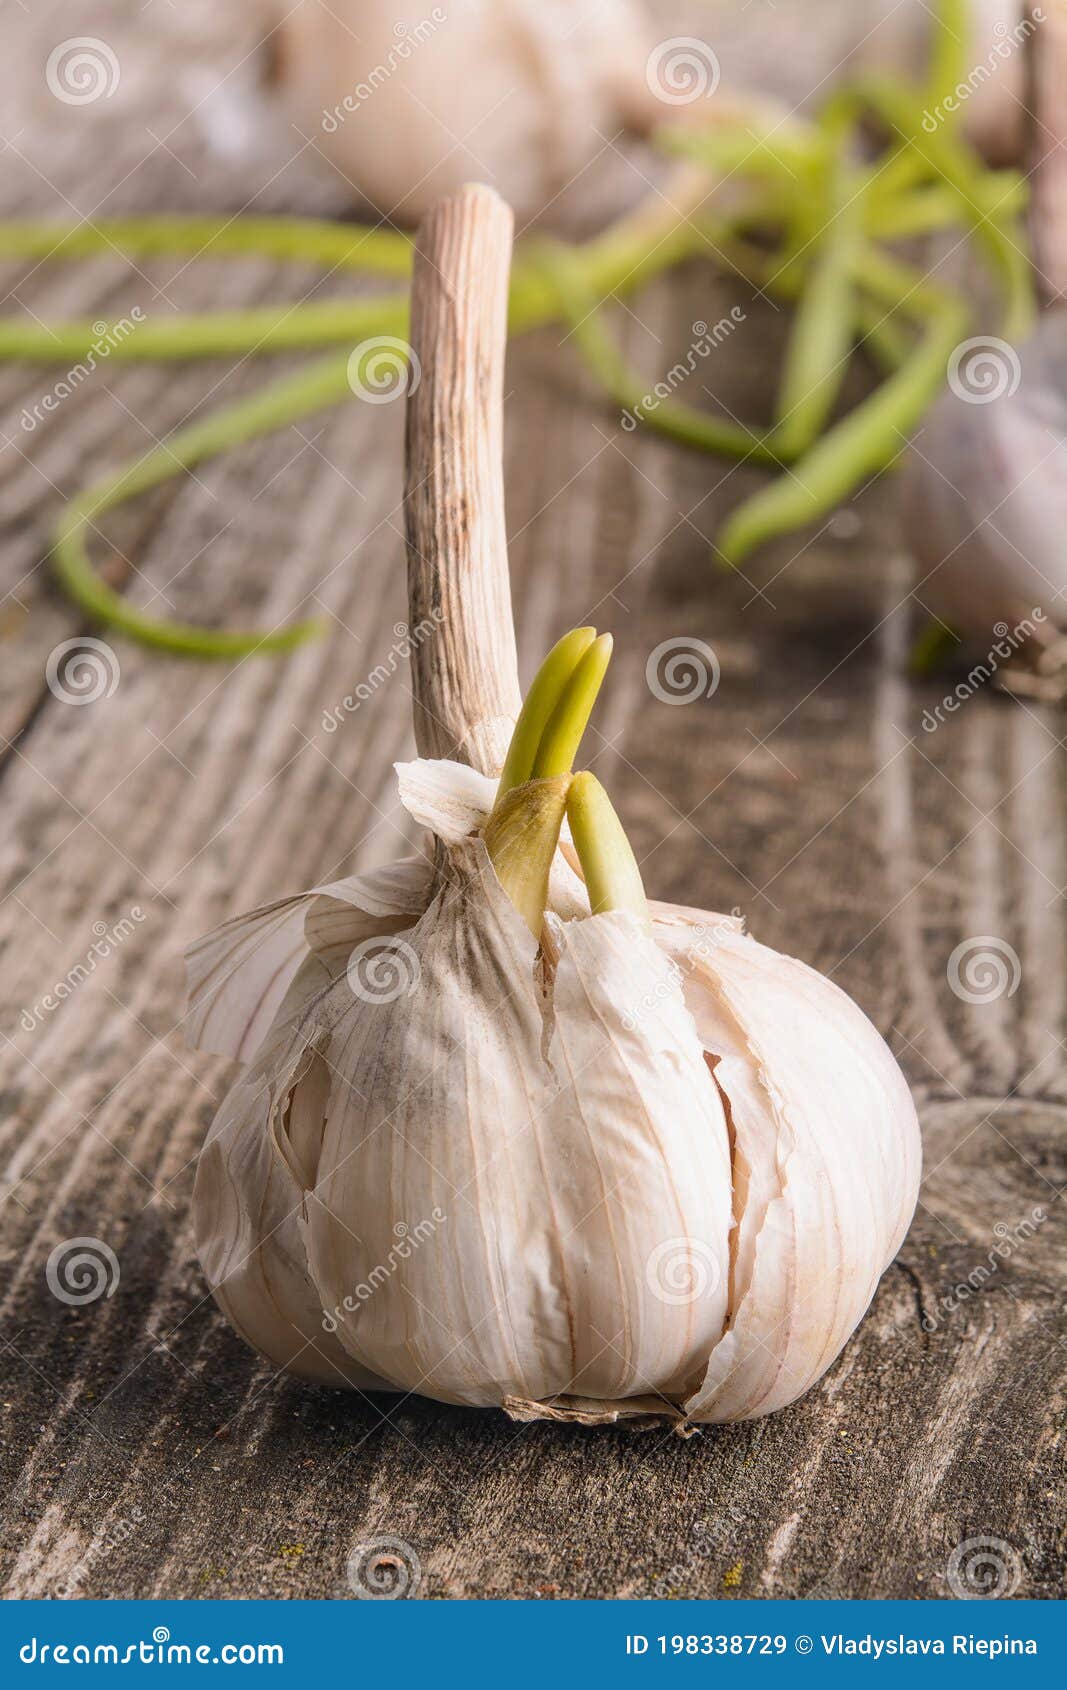 fresh garlic with green germinal sprout on  wooden table Ã¢â¬â image